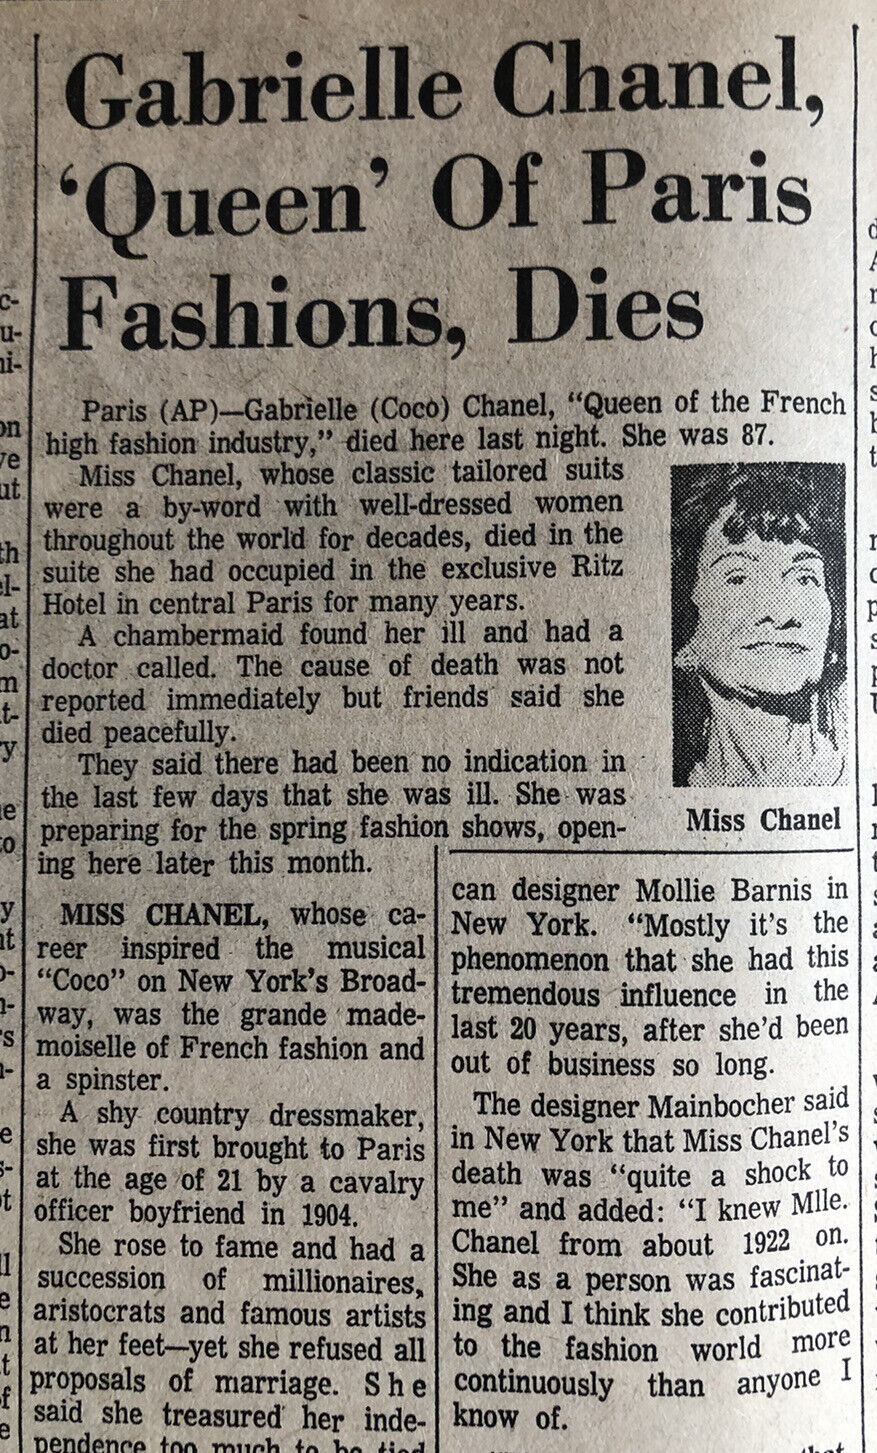 Coco Chanel Dies January 11 1971 Indy Star Newspaper Chanel No. 5 Fashion House